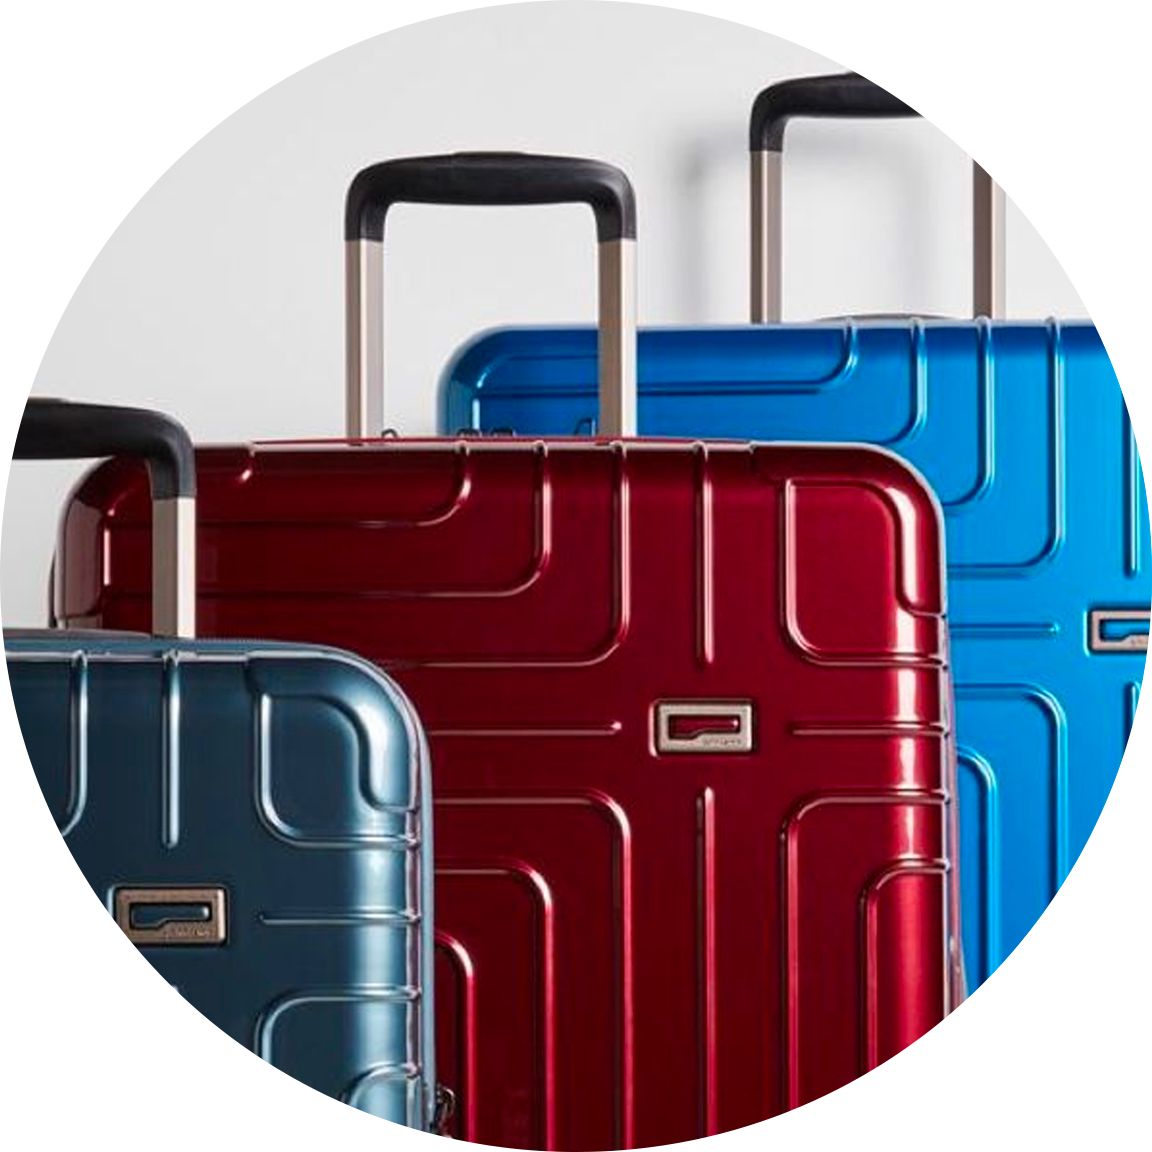 LUGGAGE BUYING GUIDE